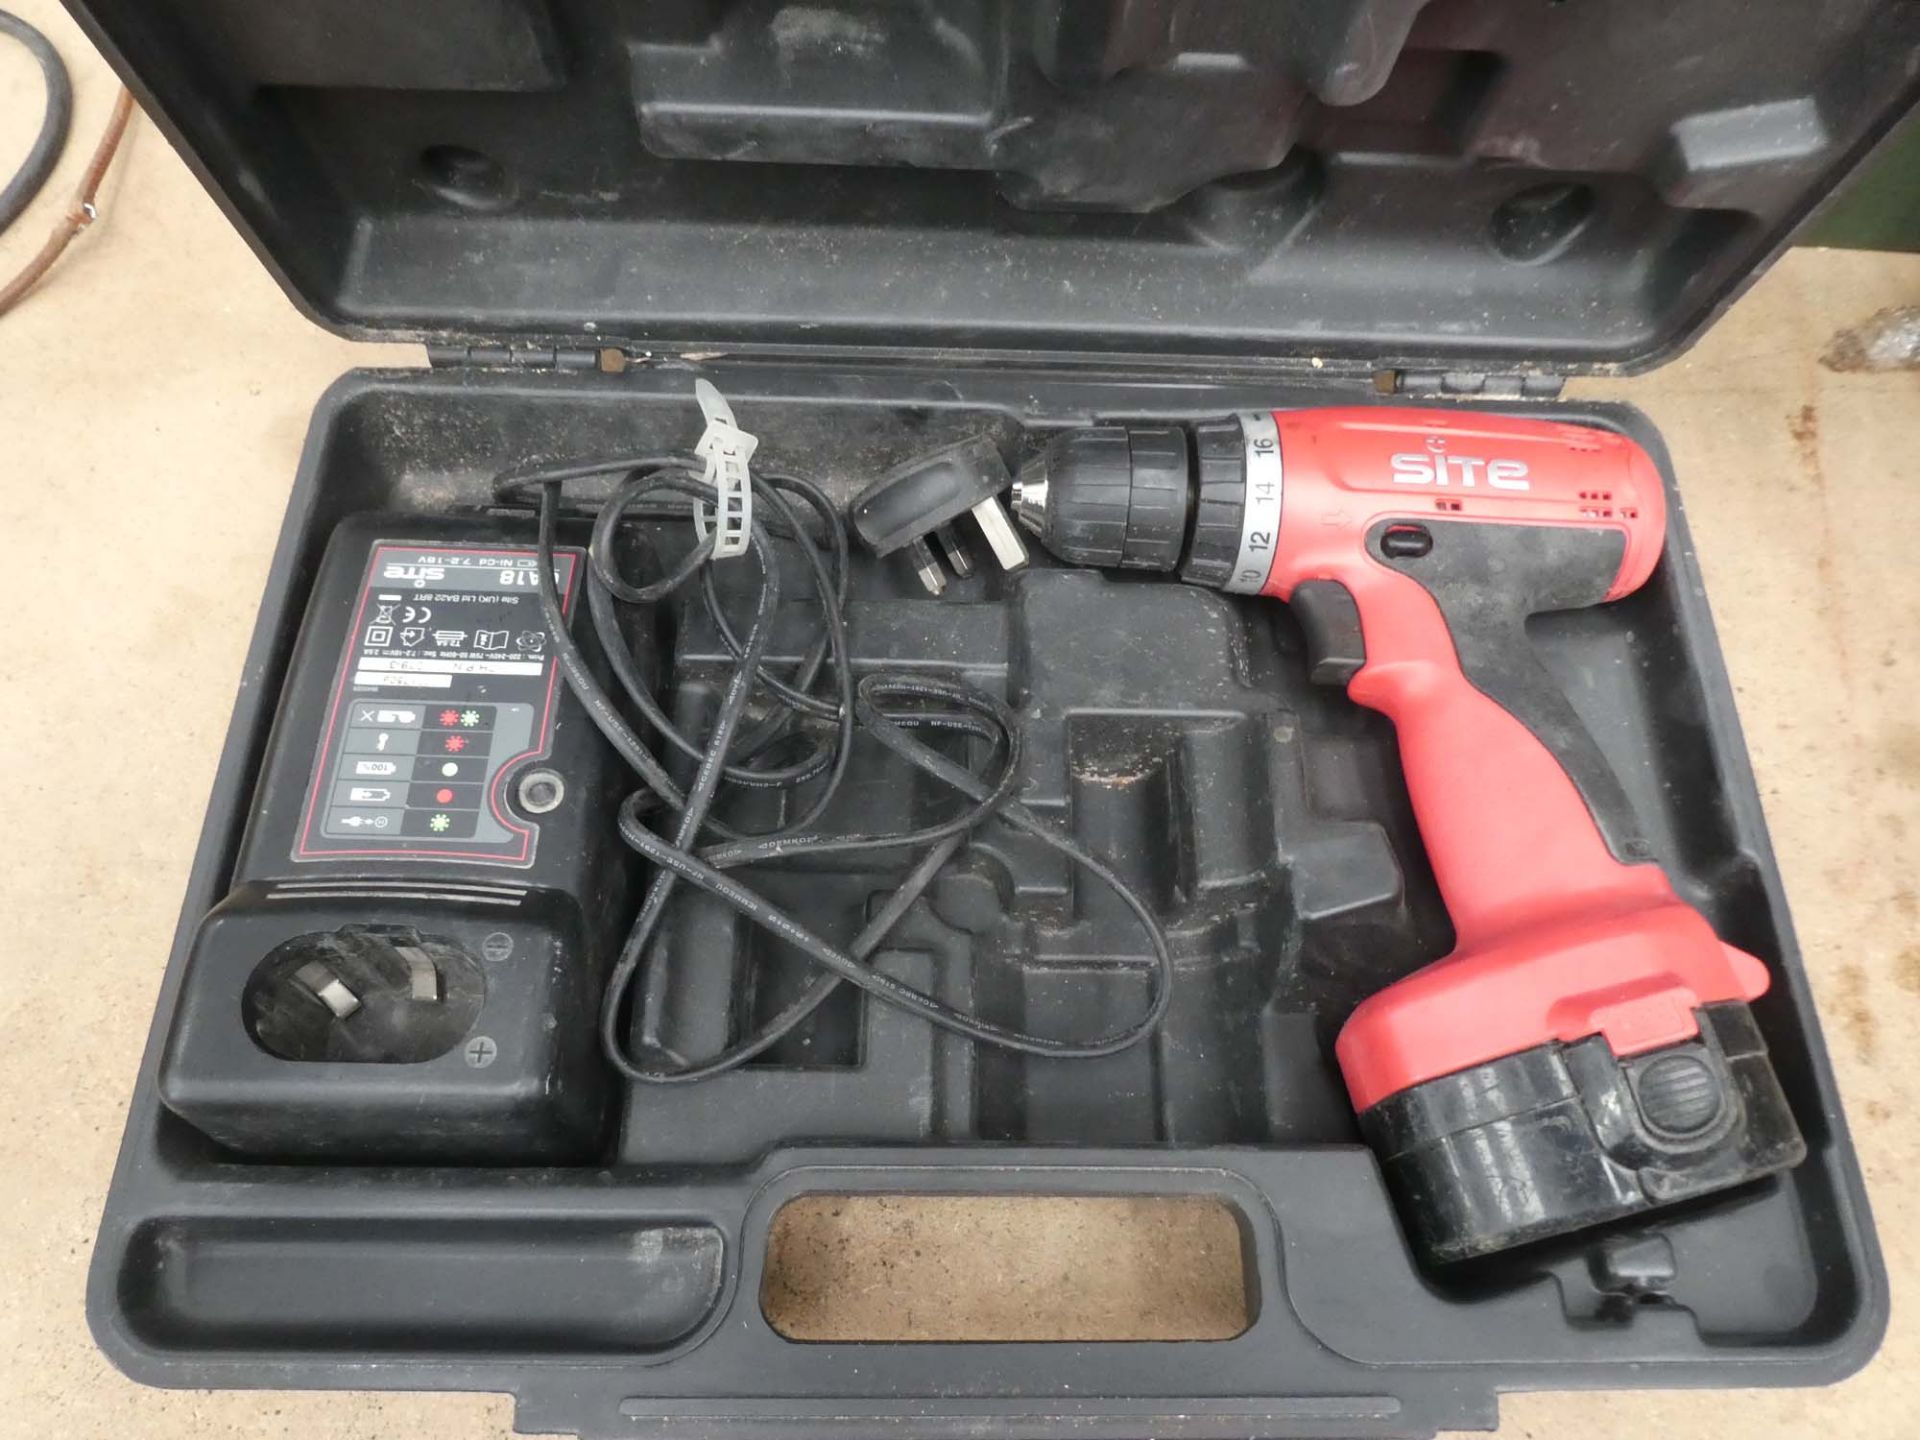 Site battery drill with one battery and charger